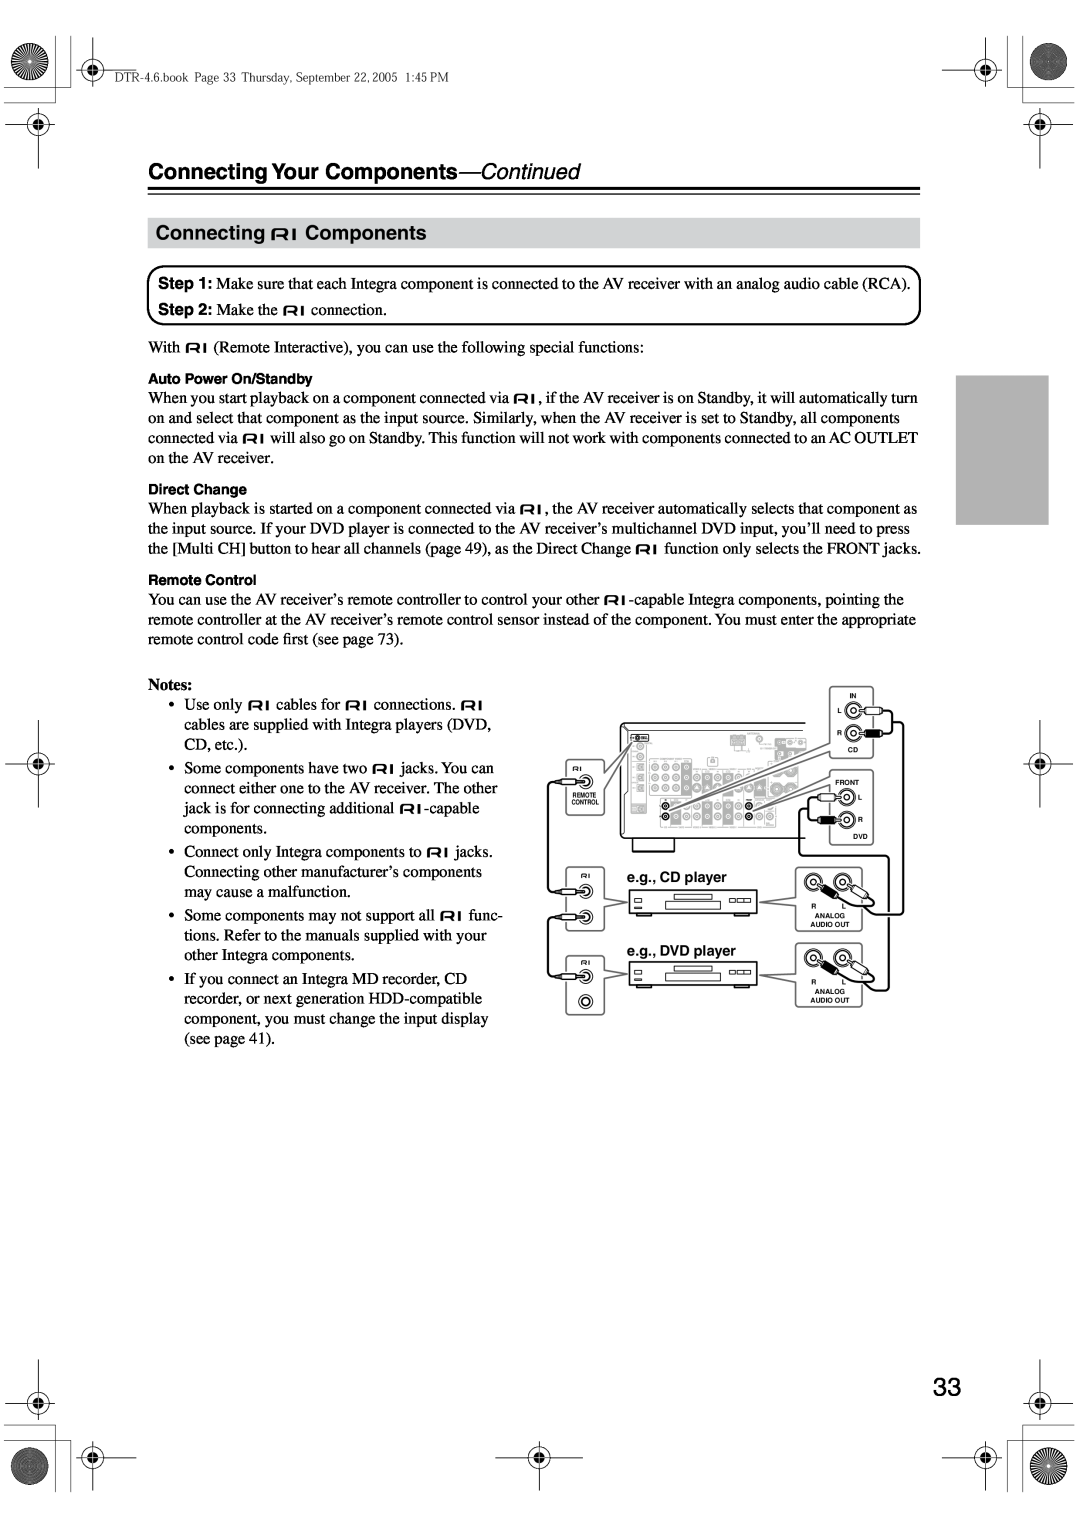 Integra DTR-4.6 instruction manual Connecting Components, Connecting Your Components—Continued, Notes 